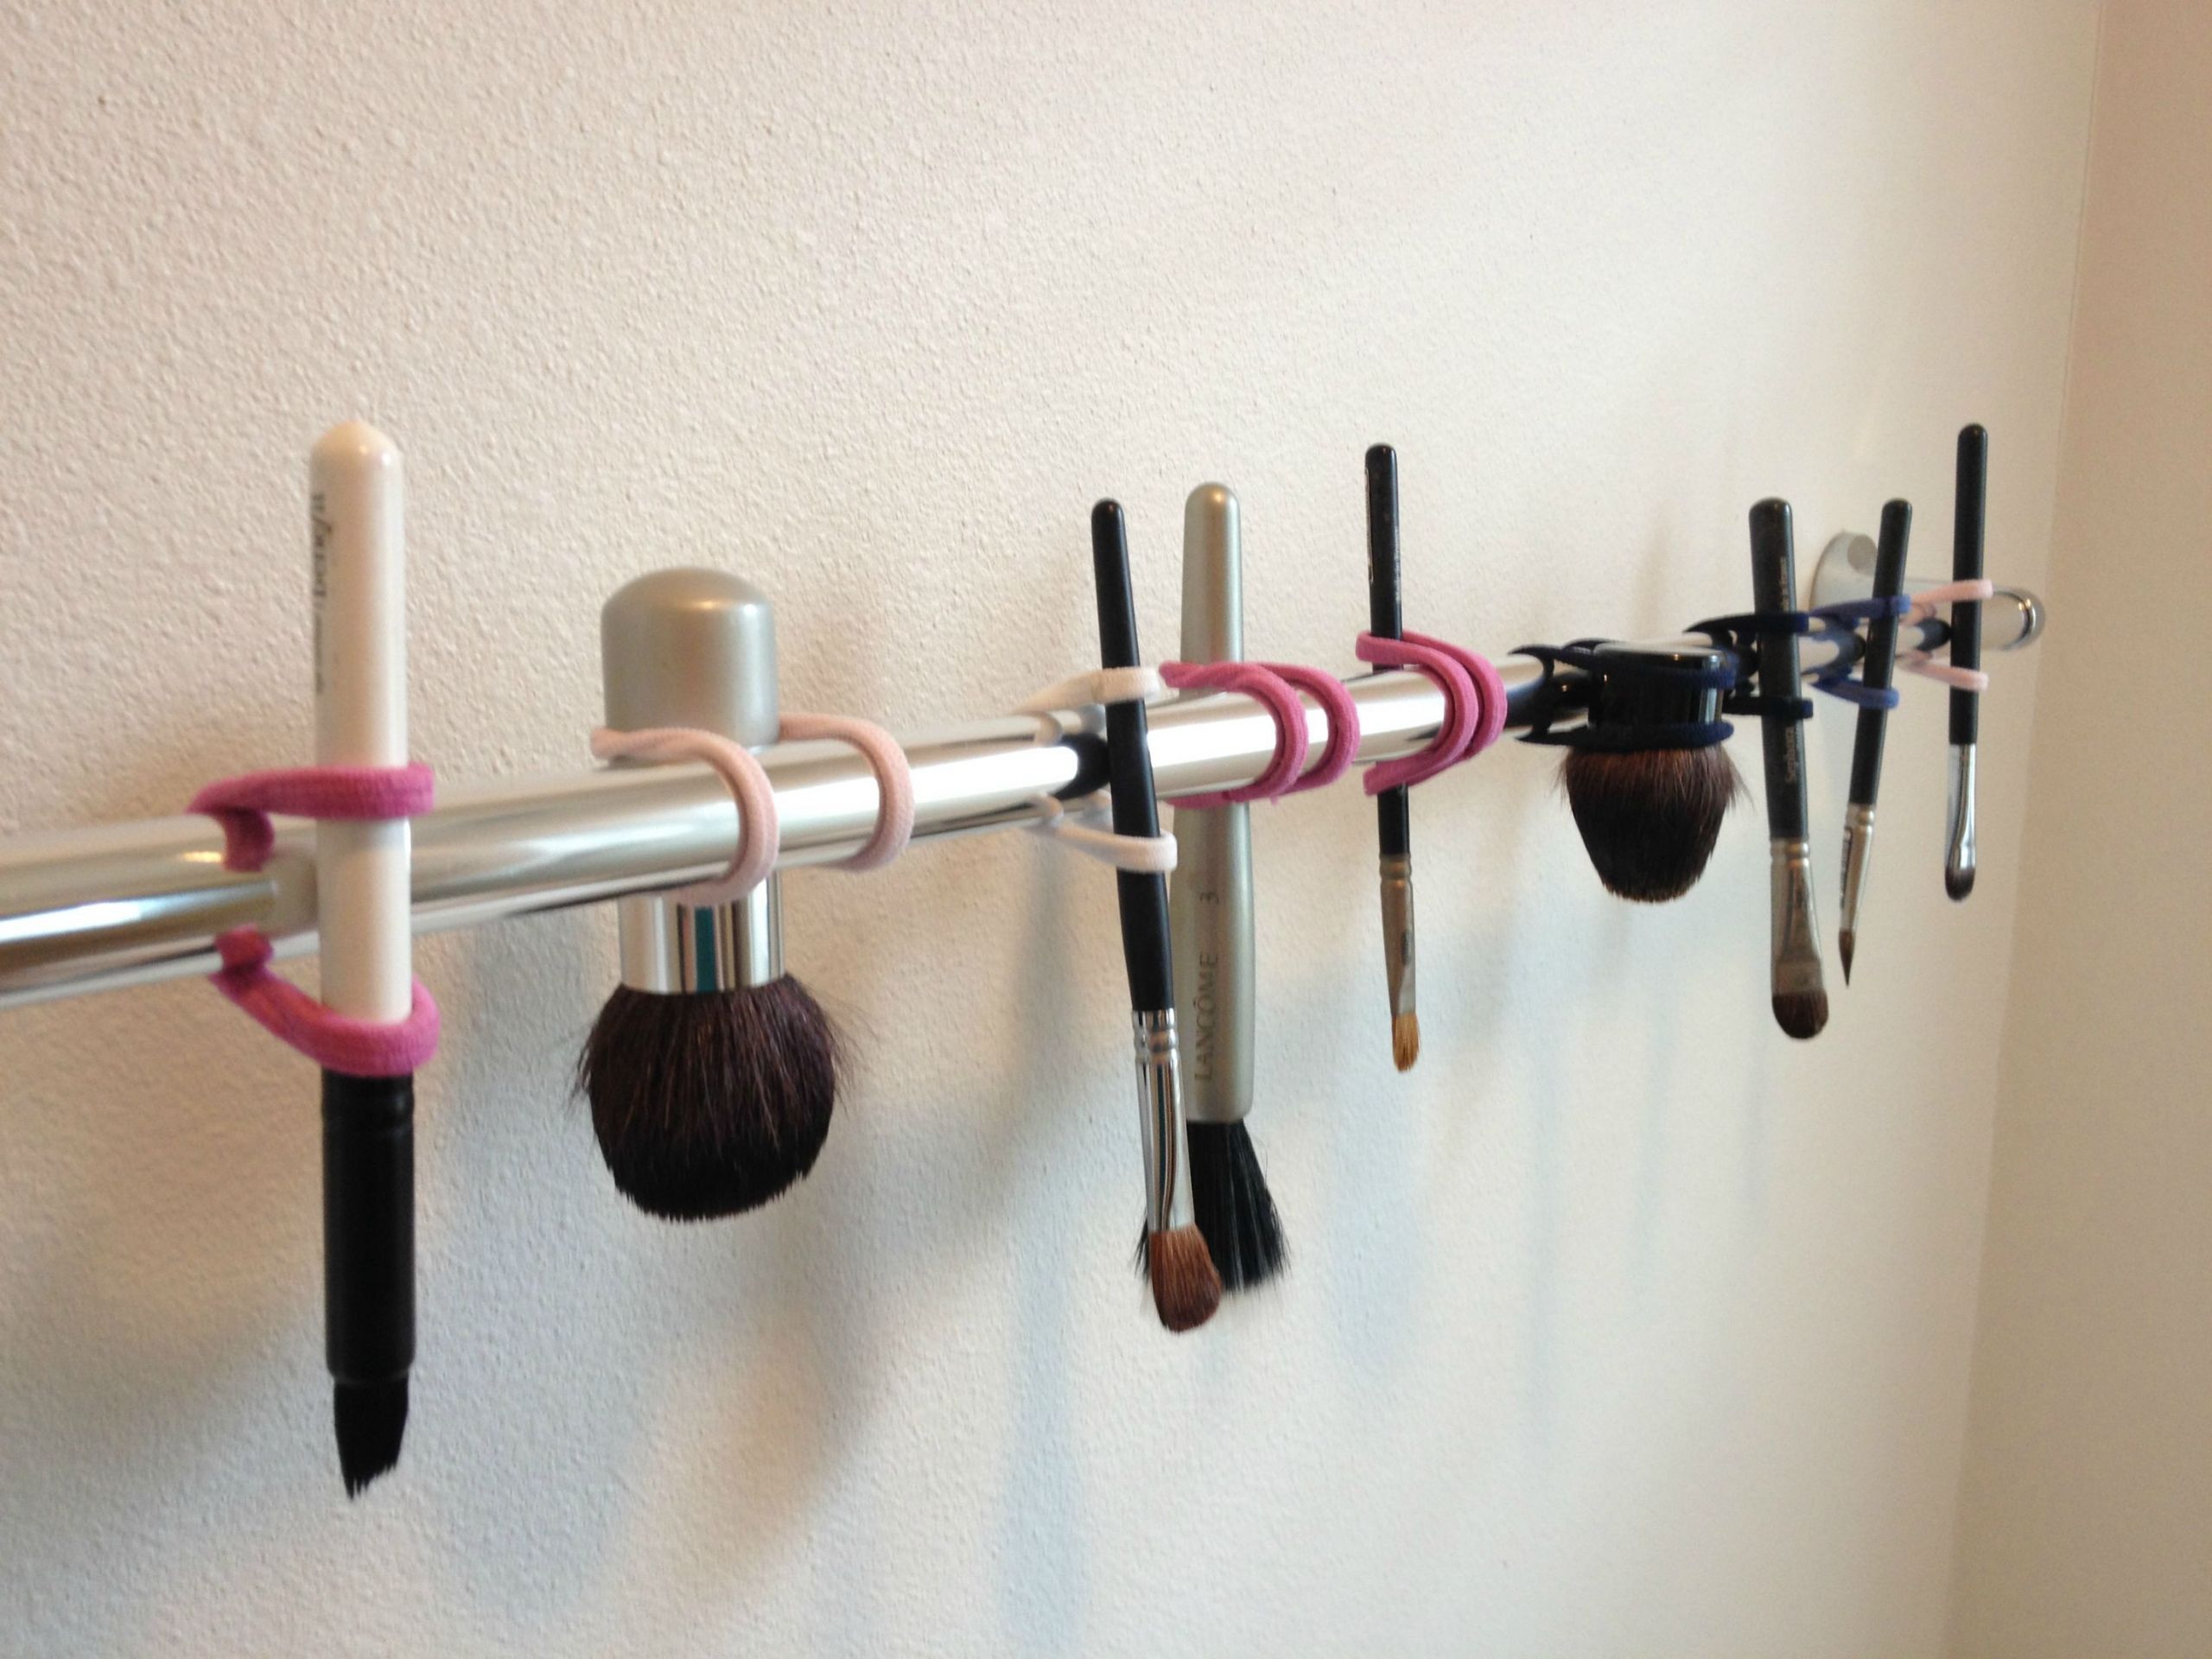 DIY Brush Drying Rack
 The Beauty Junkie’s Guide To Cleaning Your Makeup Tools